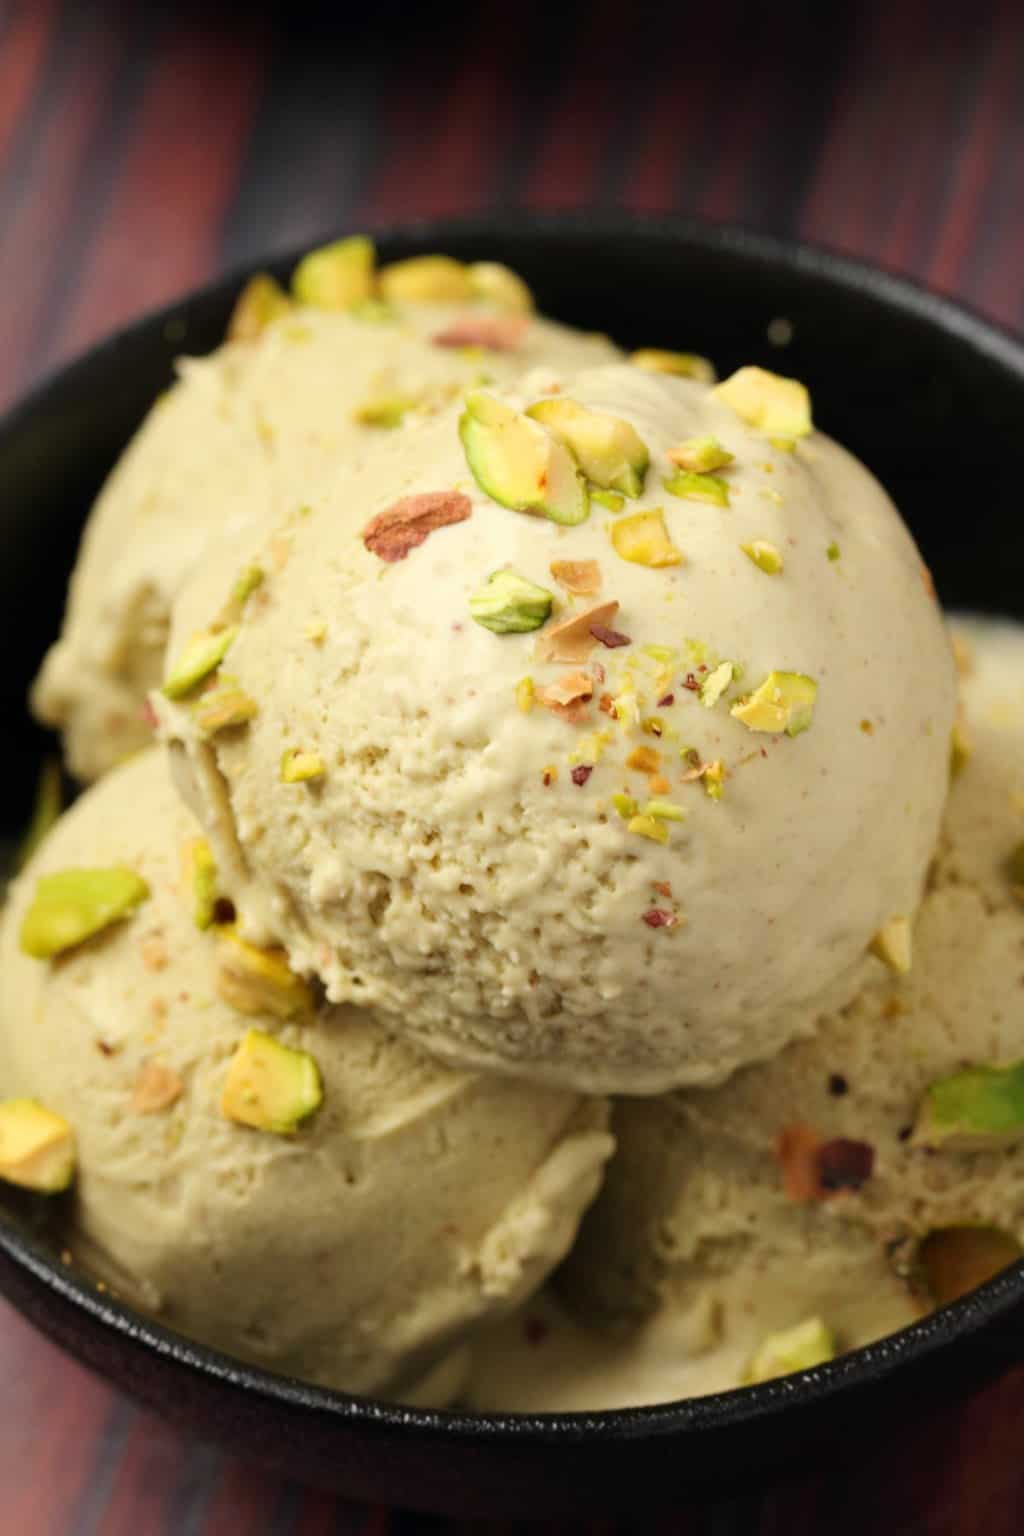 Vegan pistachio ice cream topped with crushed pistachios in a black bowl. 